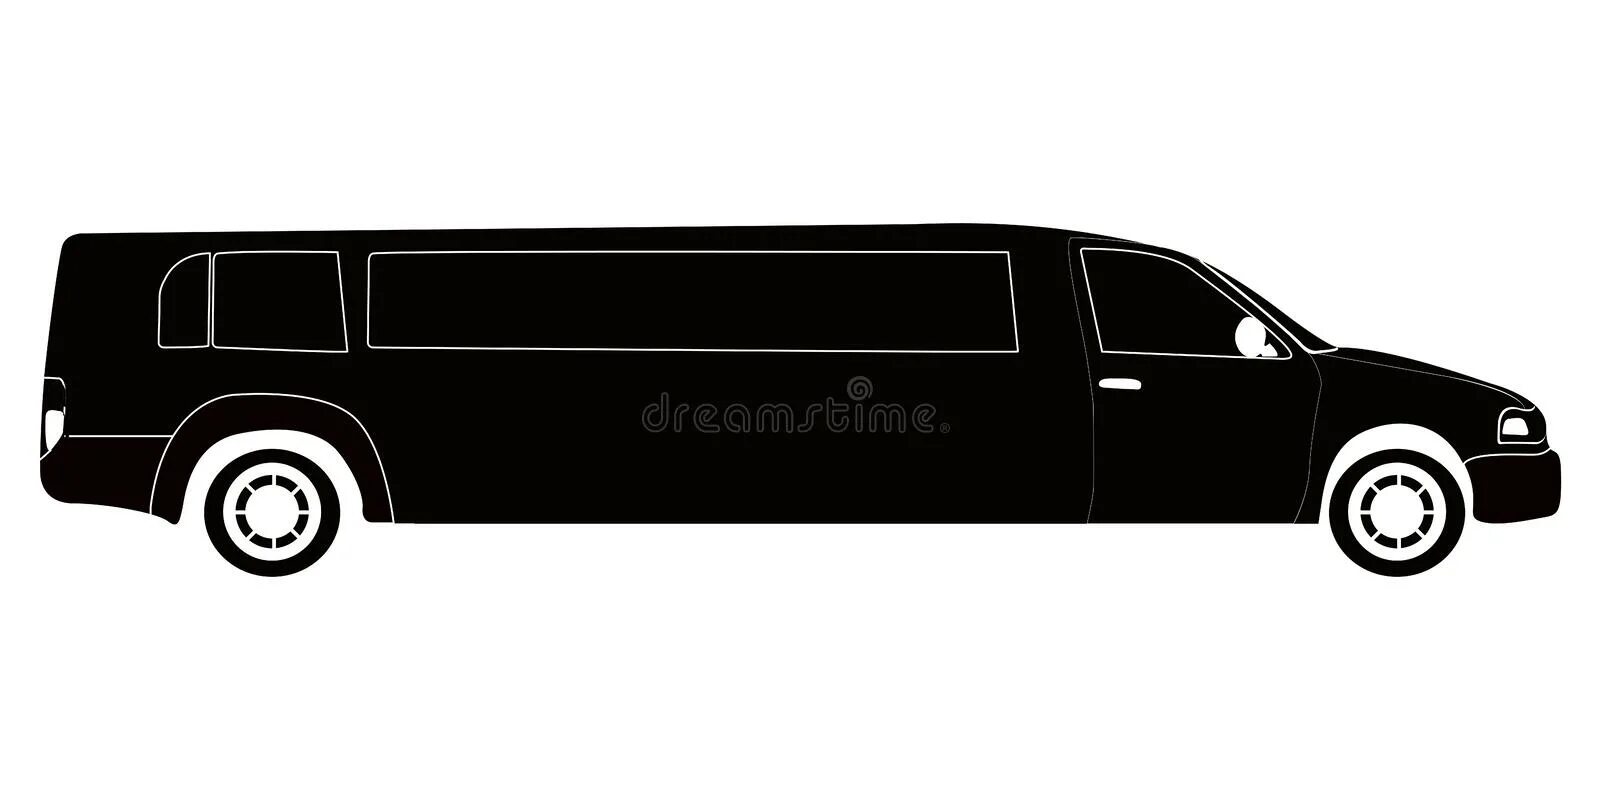 Adorable limousine coloring page for kids